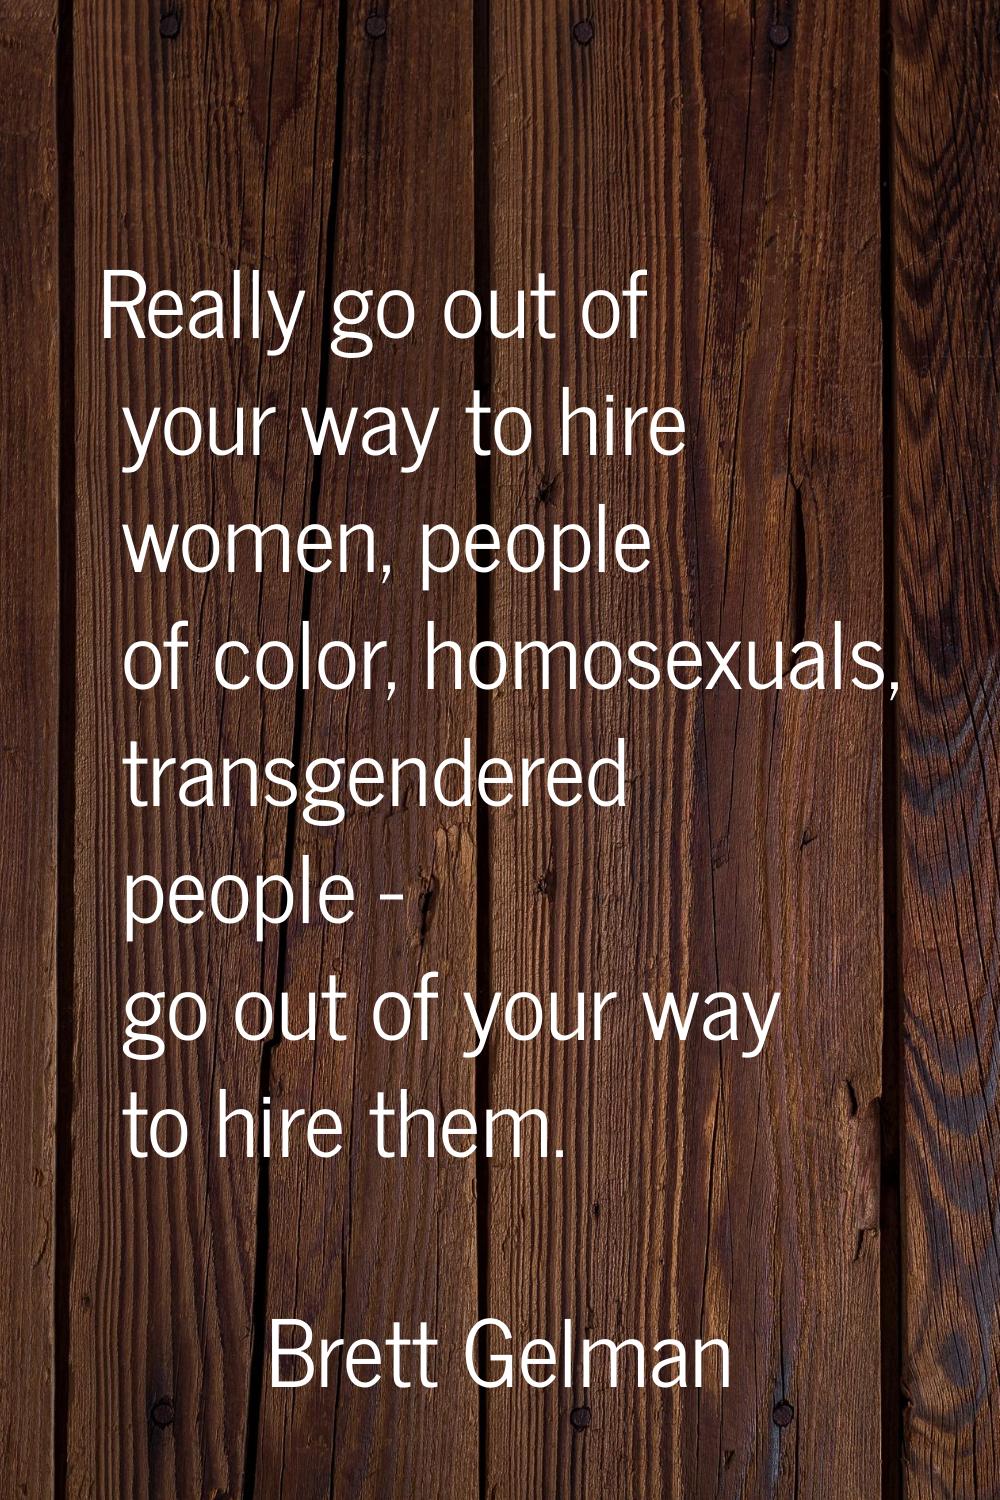 Really go out of your way to hire women, people of color, homosexuals, transgendered people - go ou